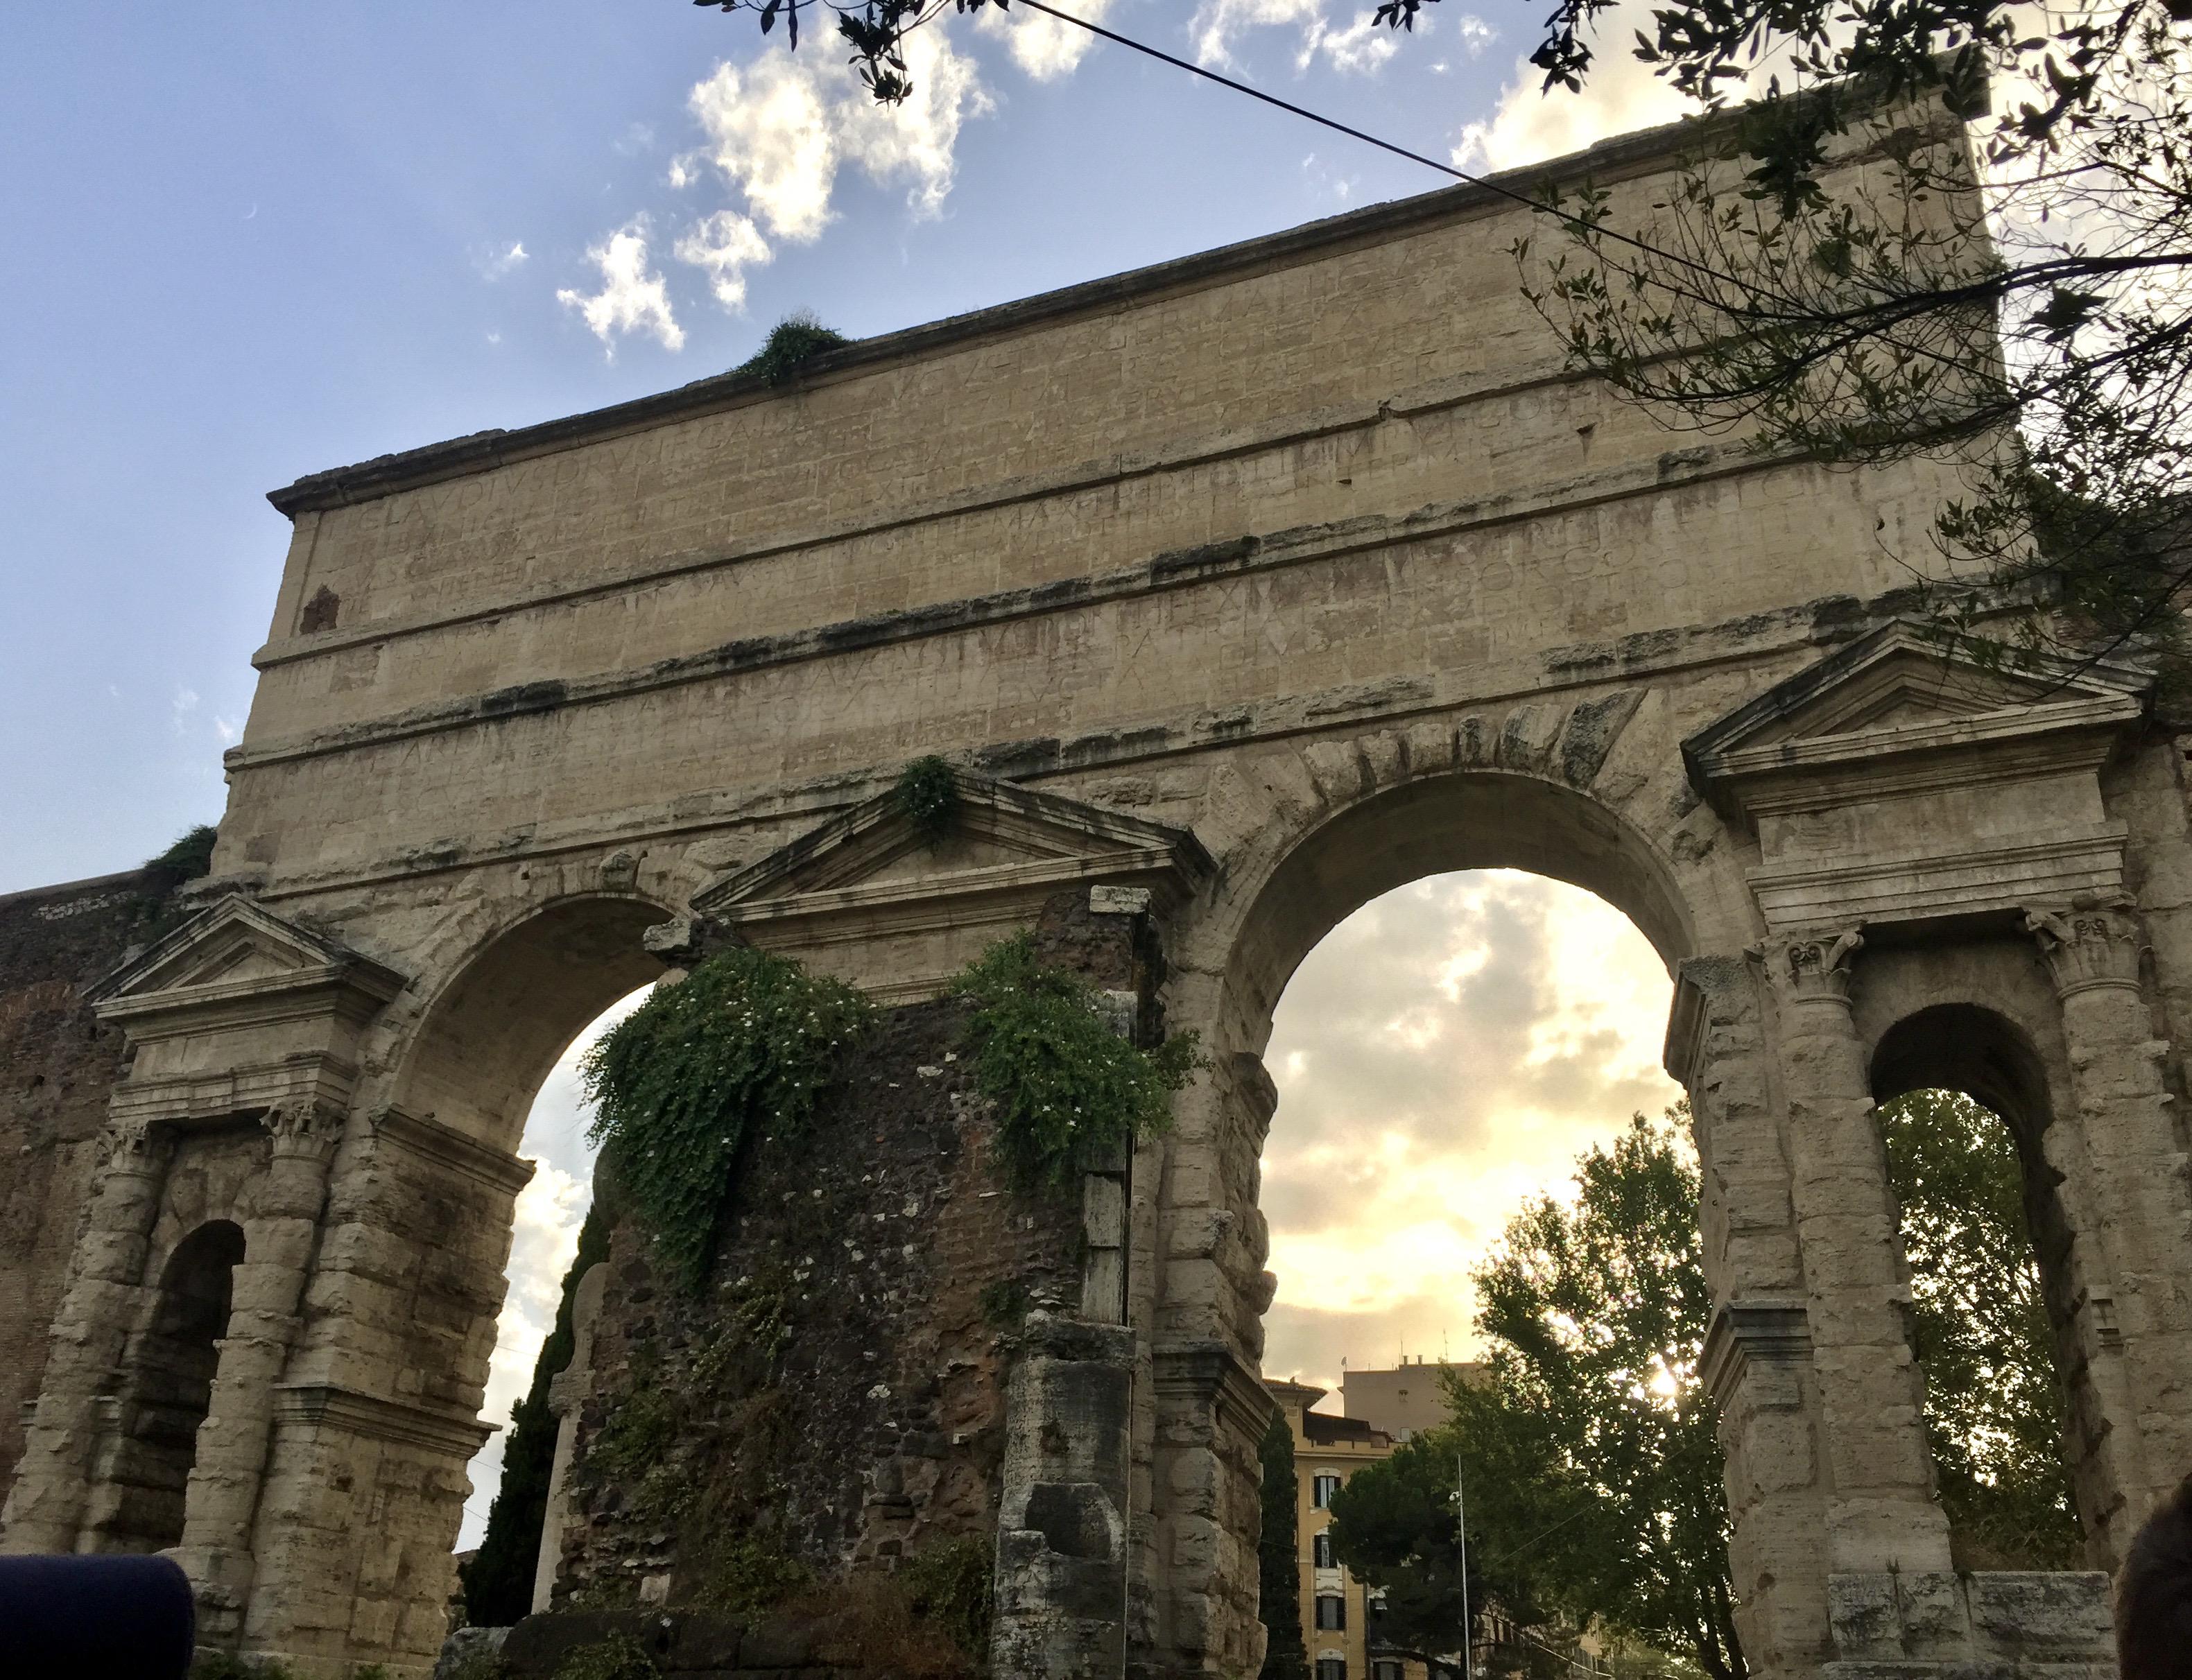 The Emperor Claudius built the Porta Maggiore, a monumental double-arch connecting two Roman aqueducts, on the border of the Esquiline Hill in 52 CE. By 275 CE, the structure was incorporated into the Aurelian Walls, transforming this travertine decoration into a pivotal defense. Rome, Italy. 